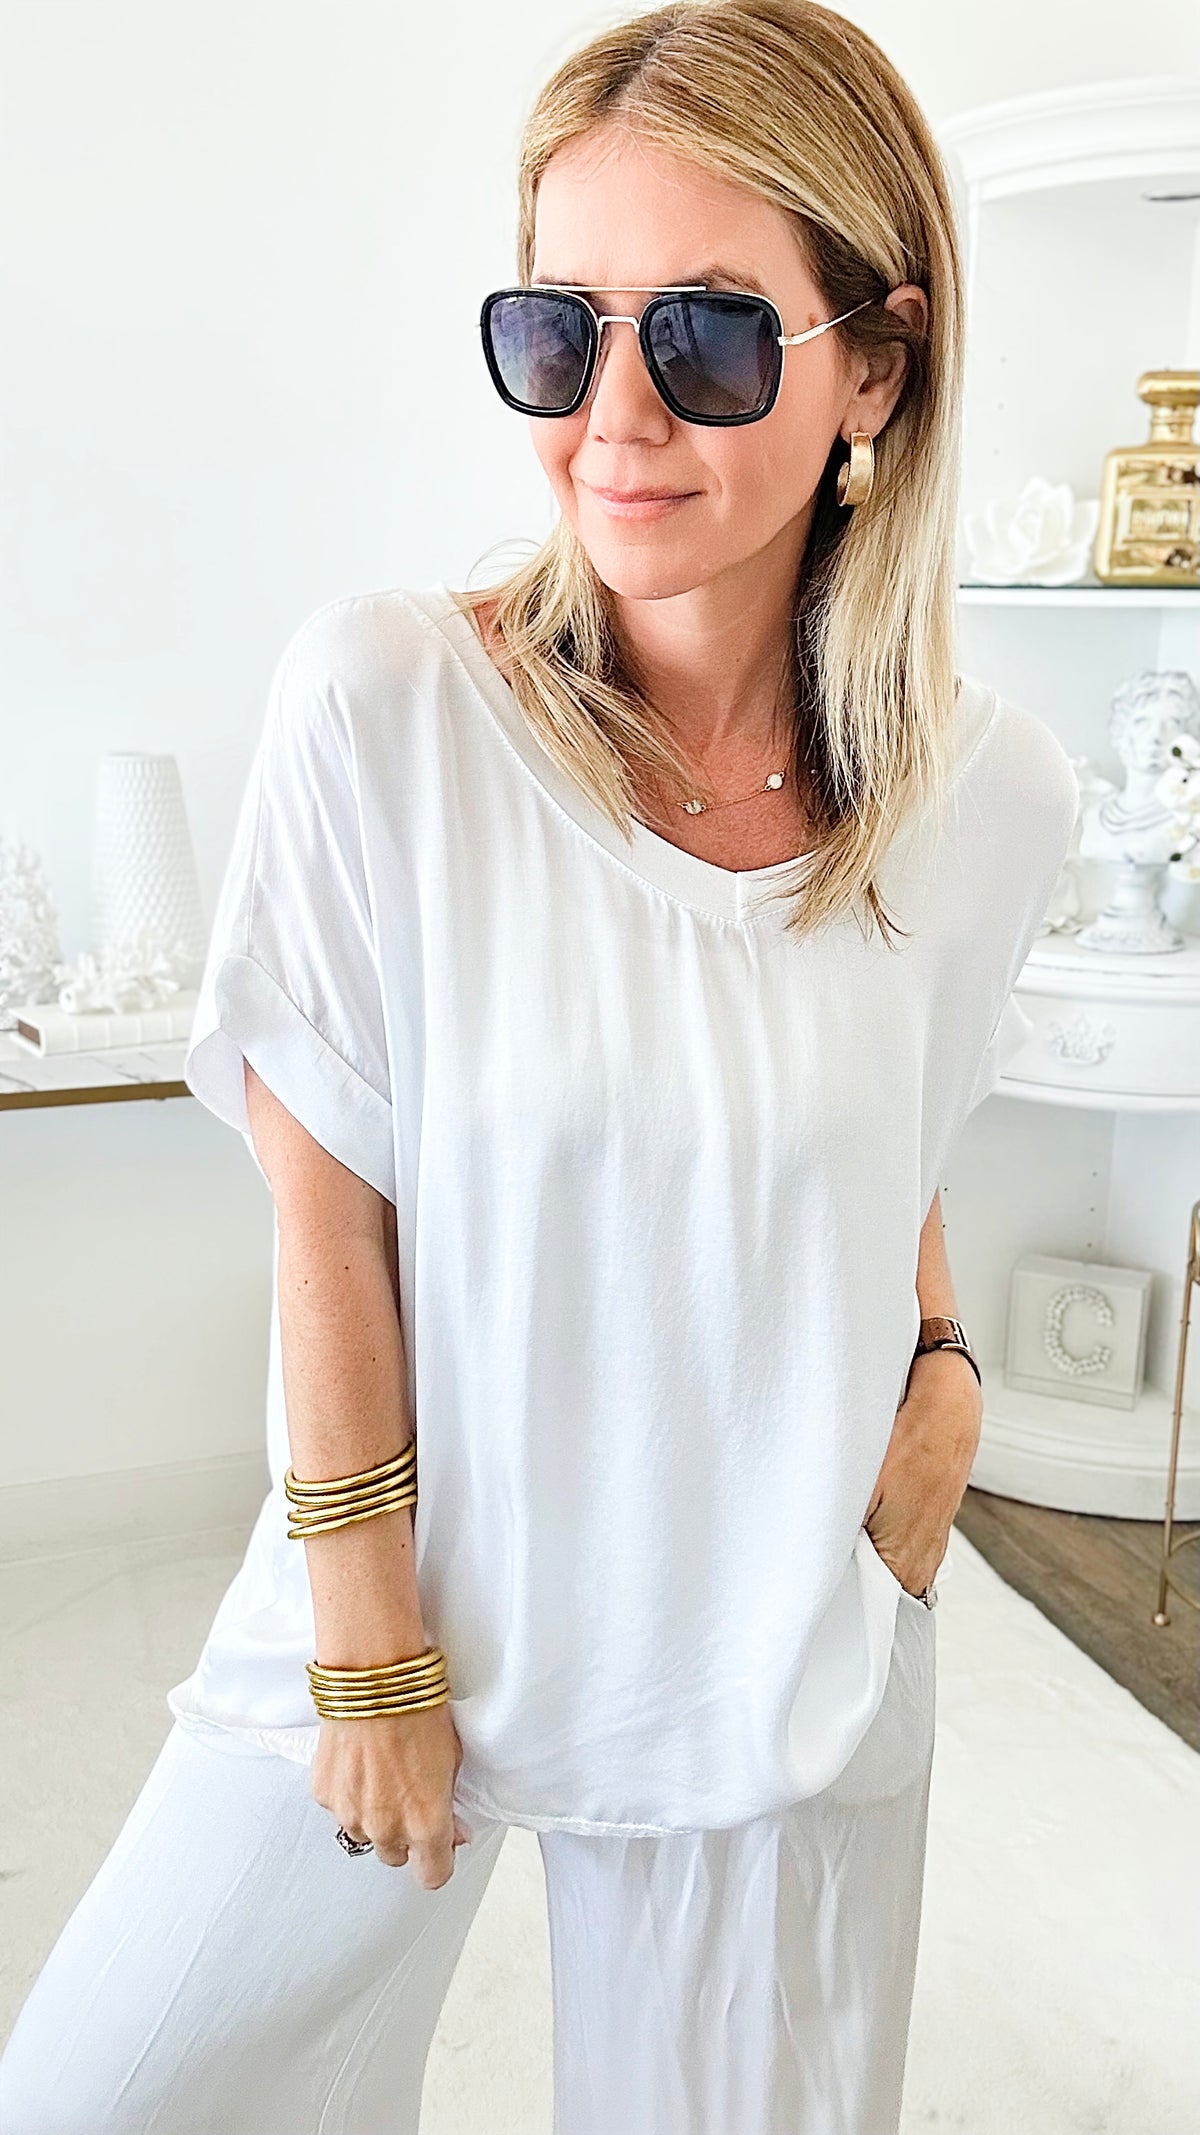 Perfection Italian V Neck Top - White-110 Short Sleeve Tops-Yolly-Coastal Bloom Boutique, find the trendiest versions of the popular styles and looks Located in Indialantic, FL